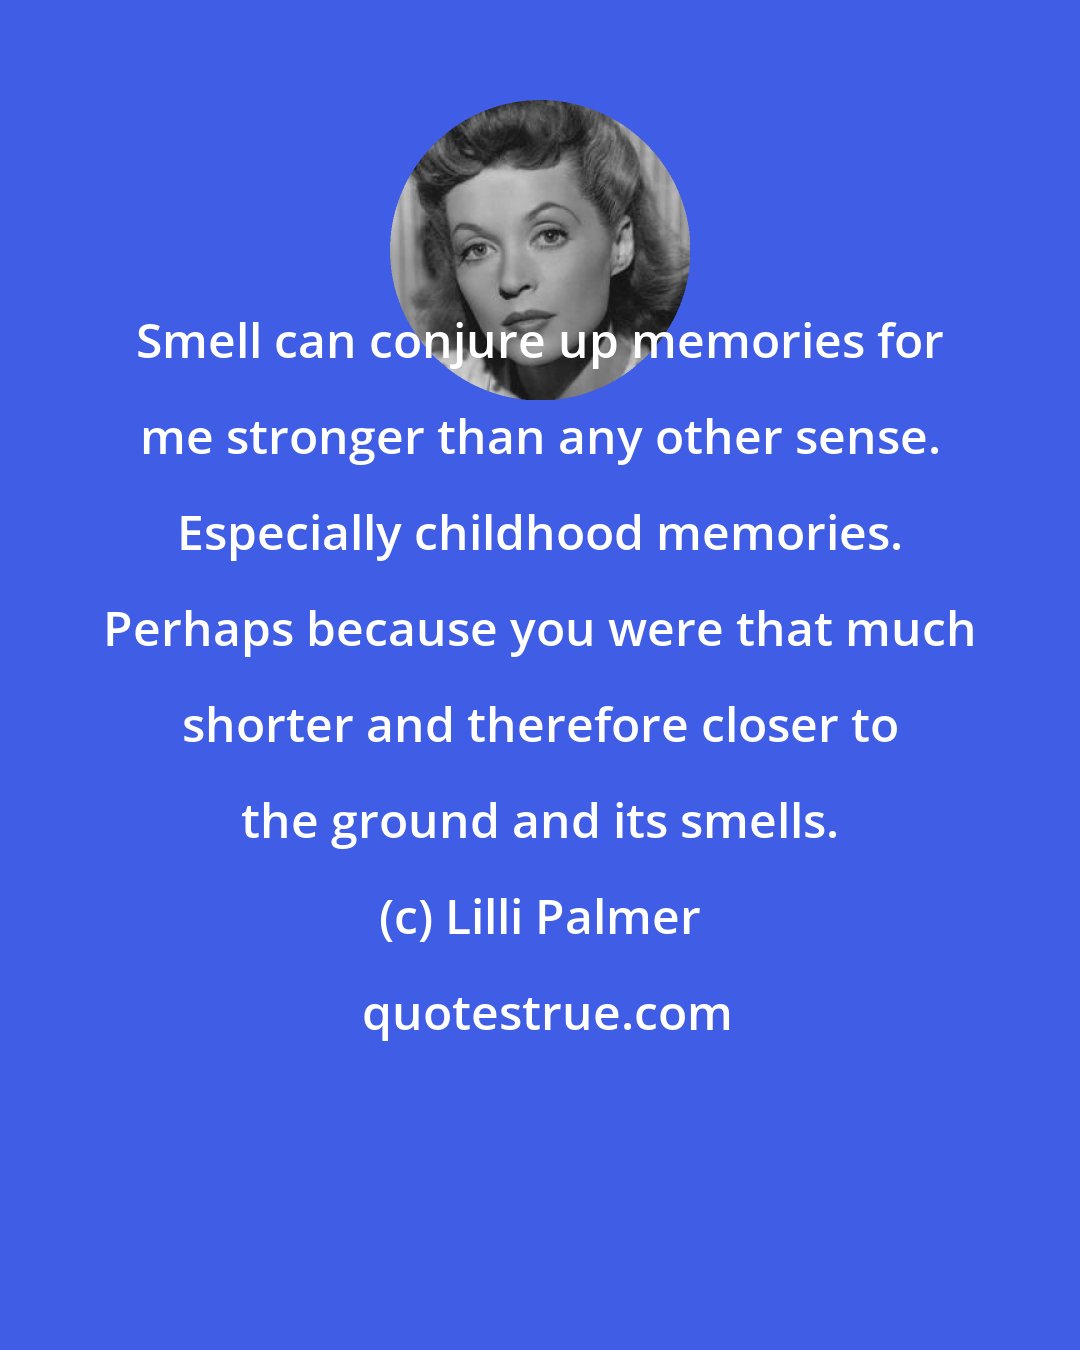 Lilli Palmer: Smell can conjure up memories for me stronger than any other sense. Especially childhood memories. Perhaps because you were that much shorter and therefore closer to the ground and its smells.